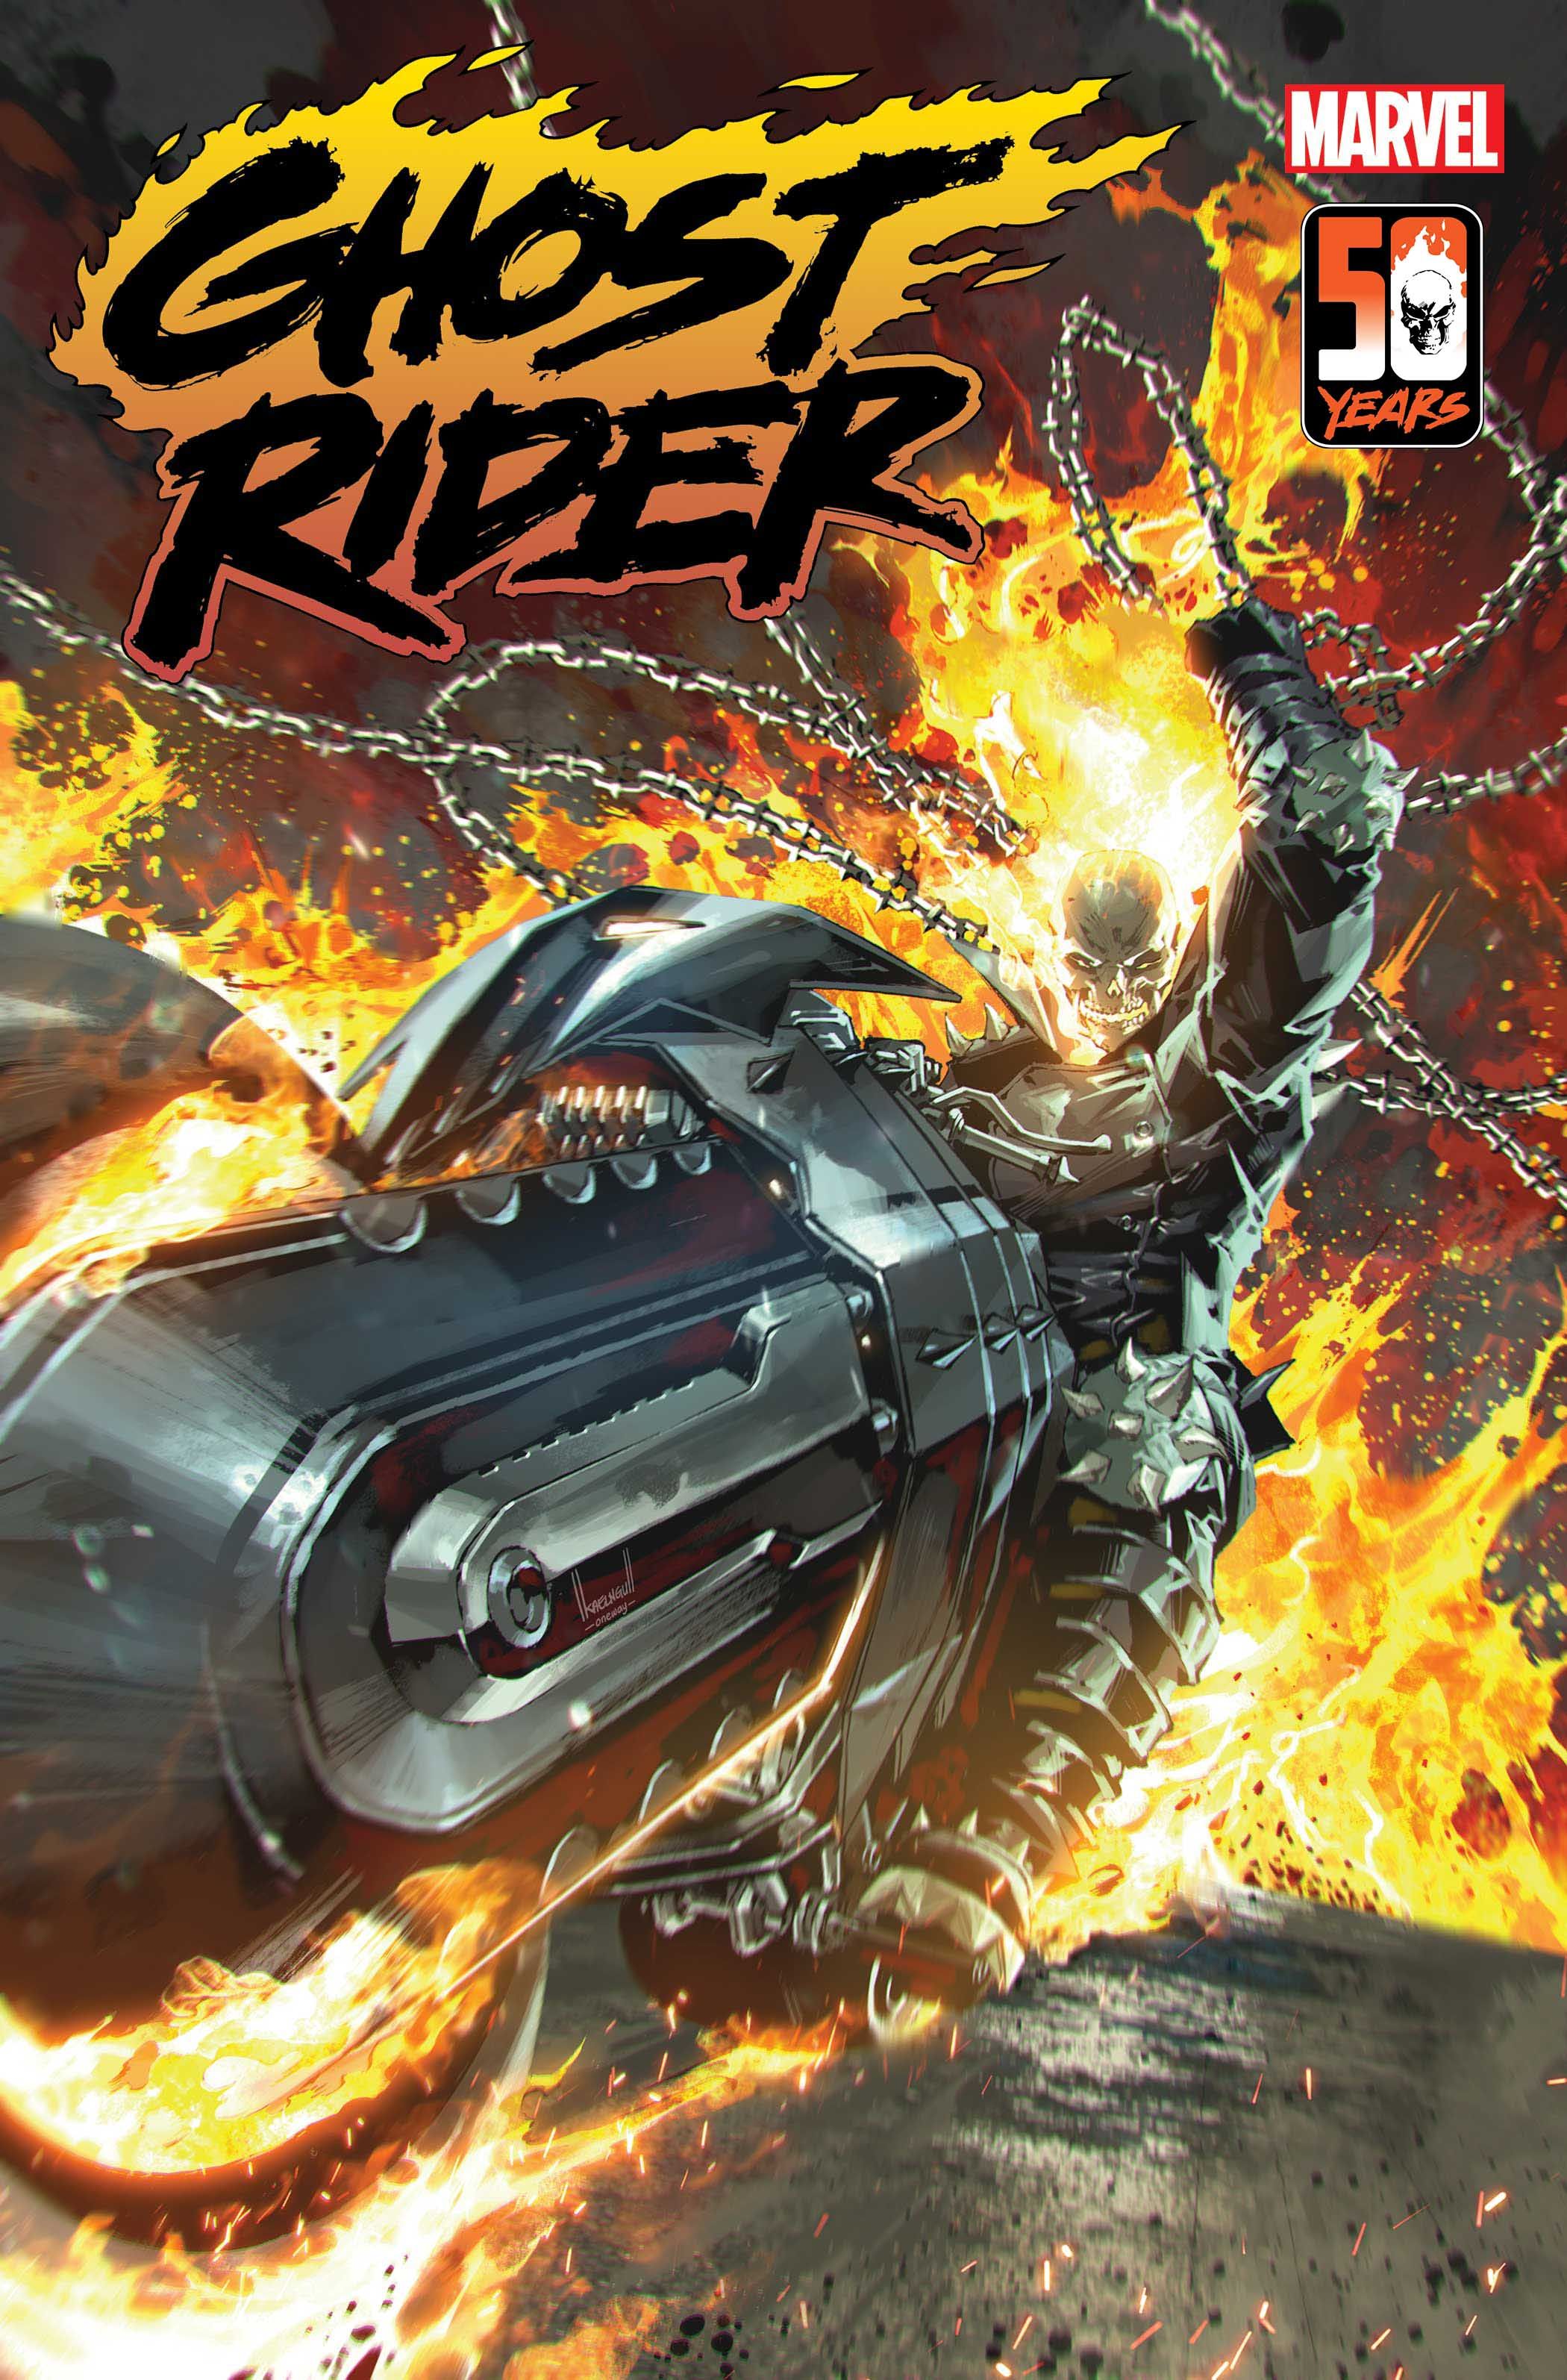 Johnny Blaze in the Year of Vengeance on the cover of Ghost Rider 1 by Kael Ngu